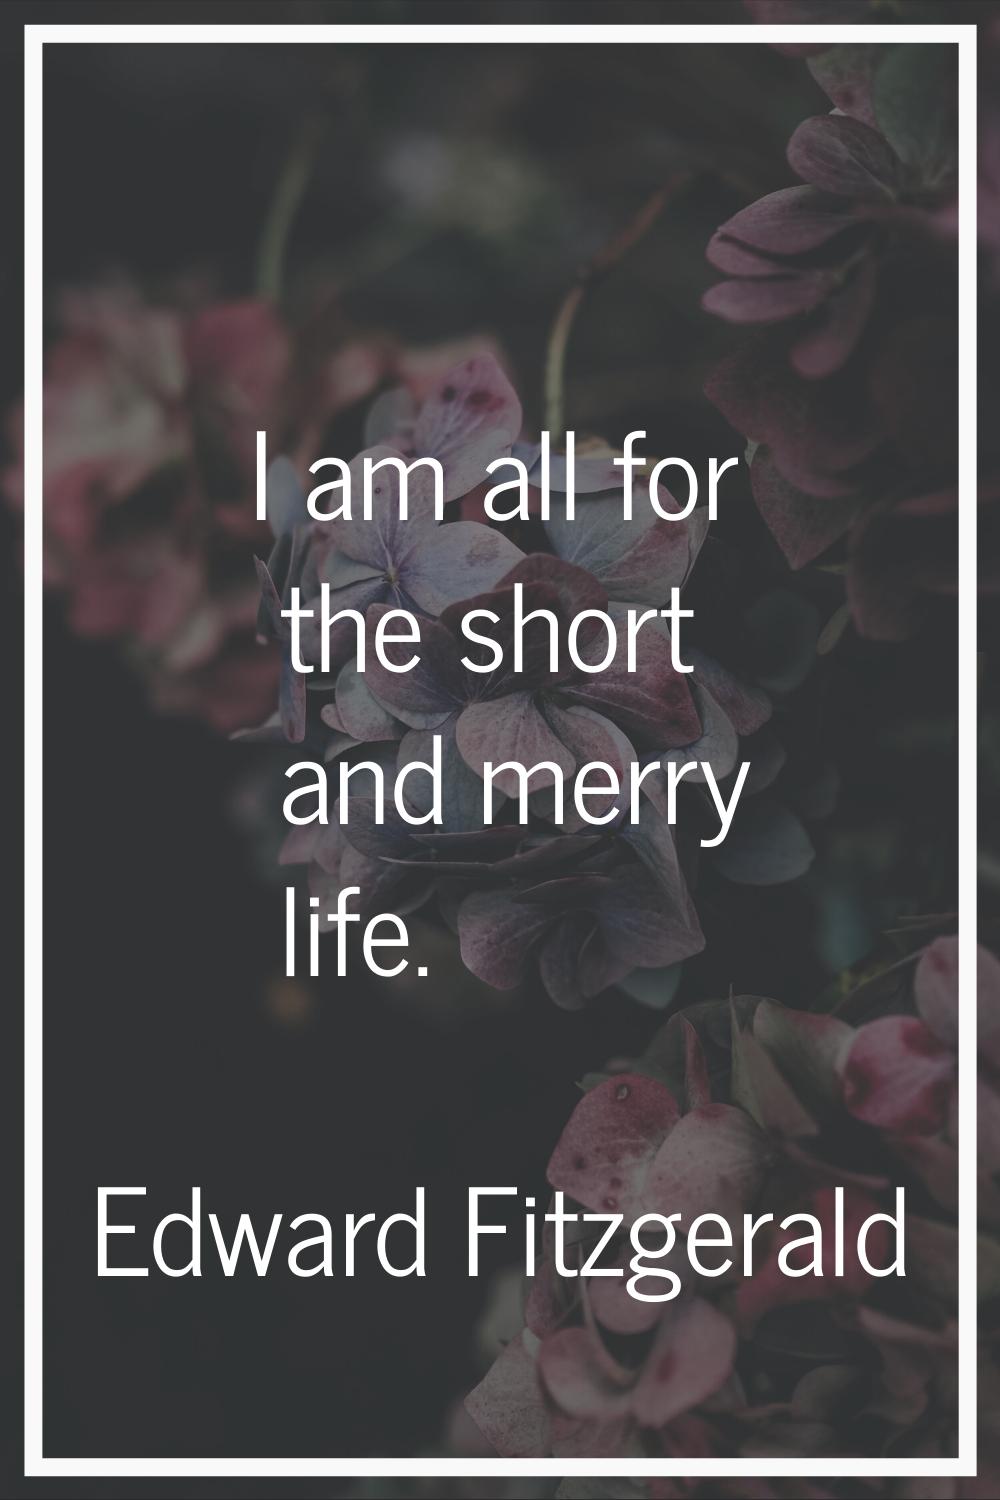 I am all for the short and merry life.